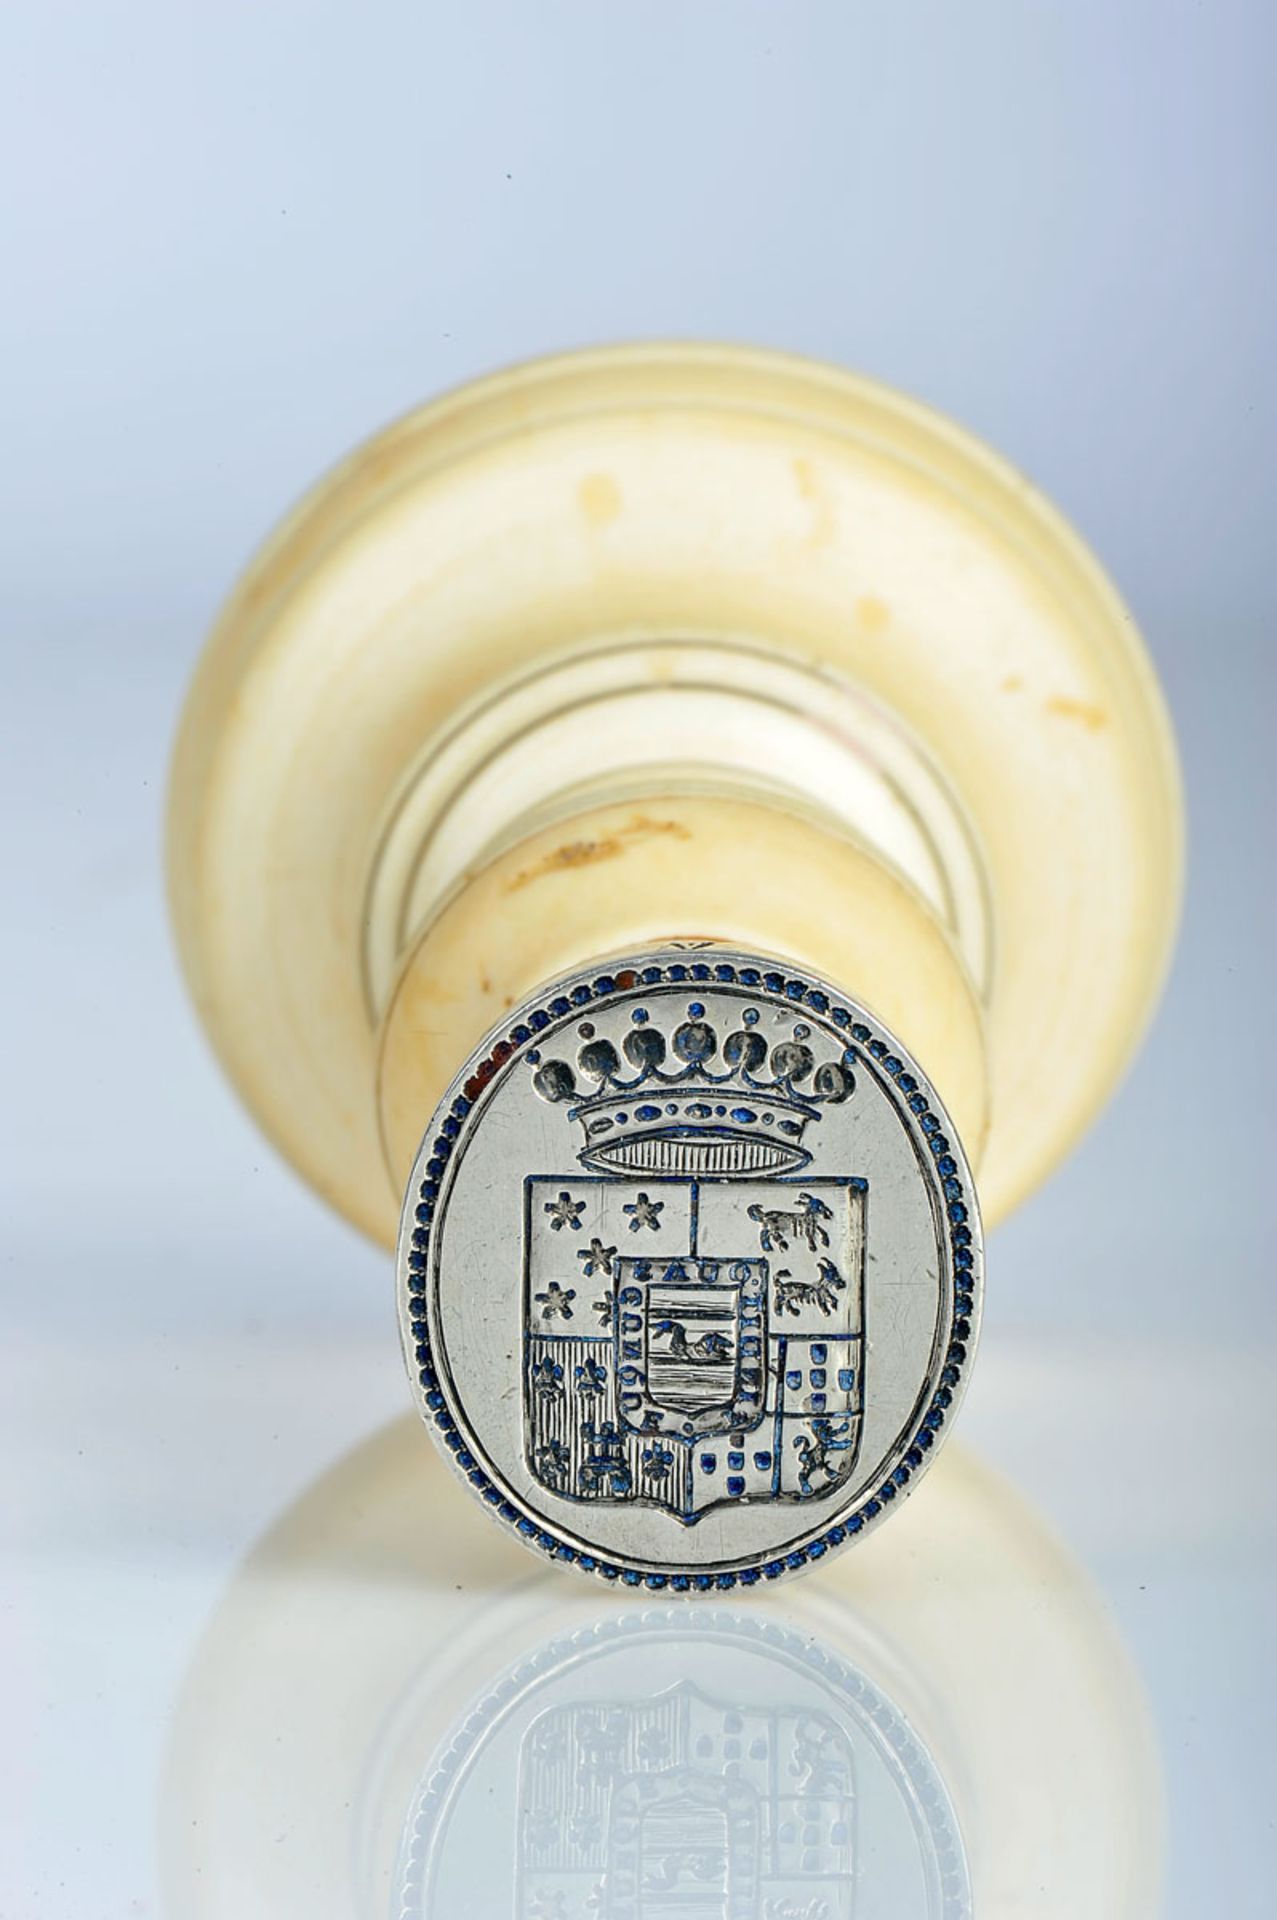 A Signet, turned ivory handle, silver handle engraved with the coat of arms of a Portuguese family -